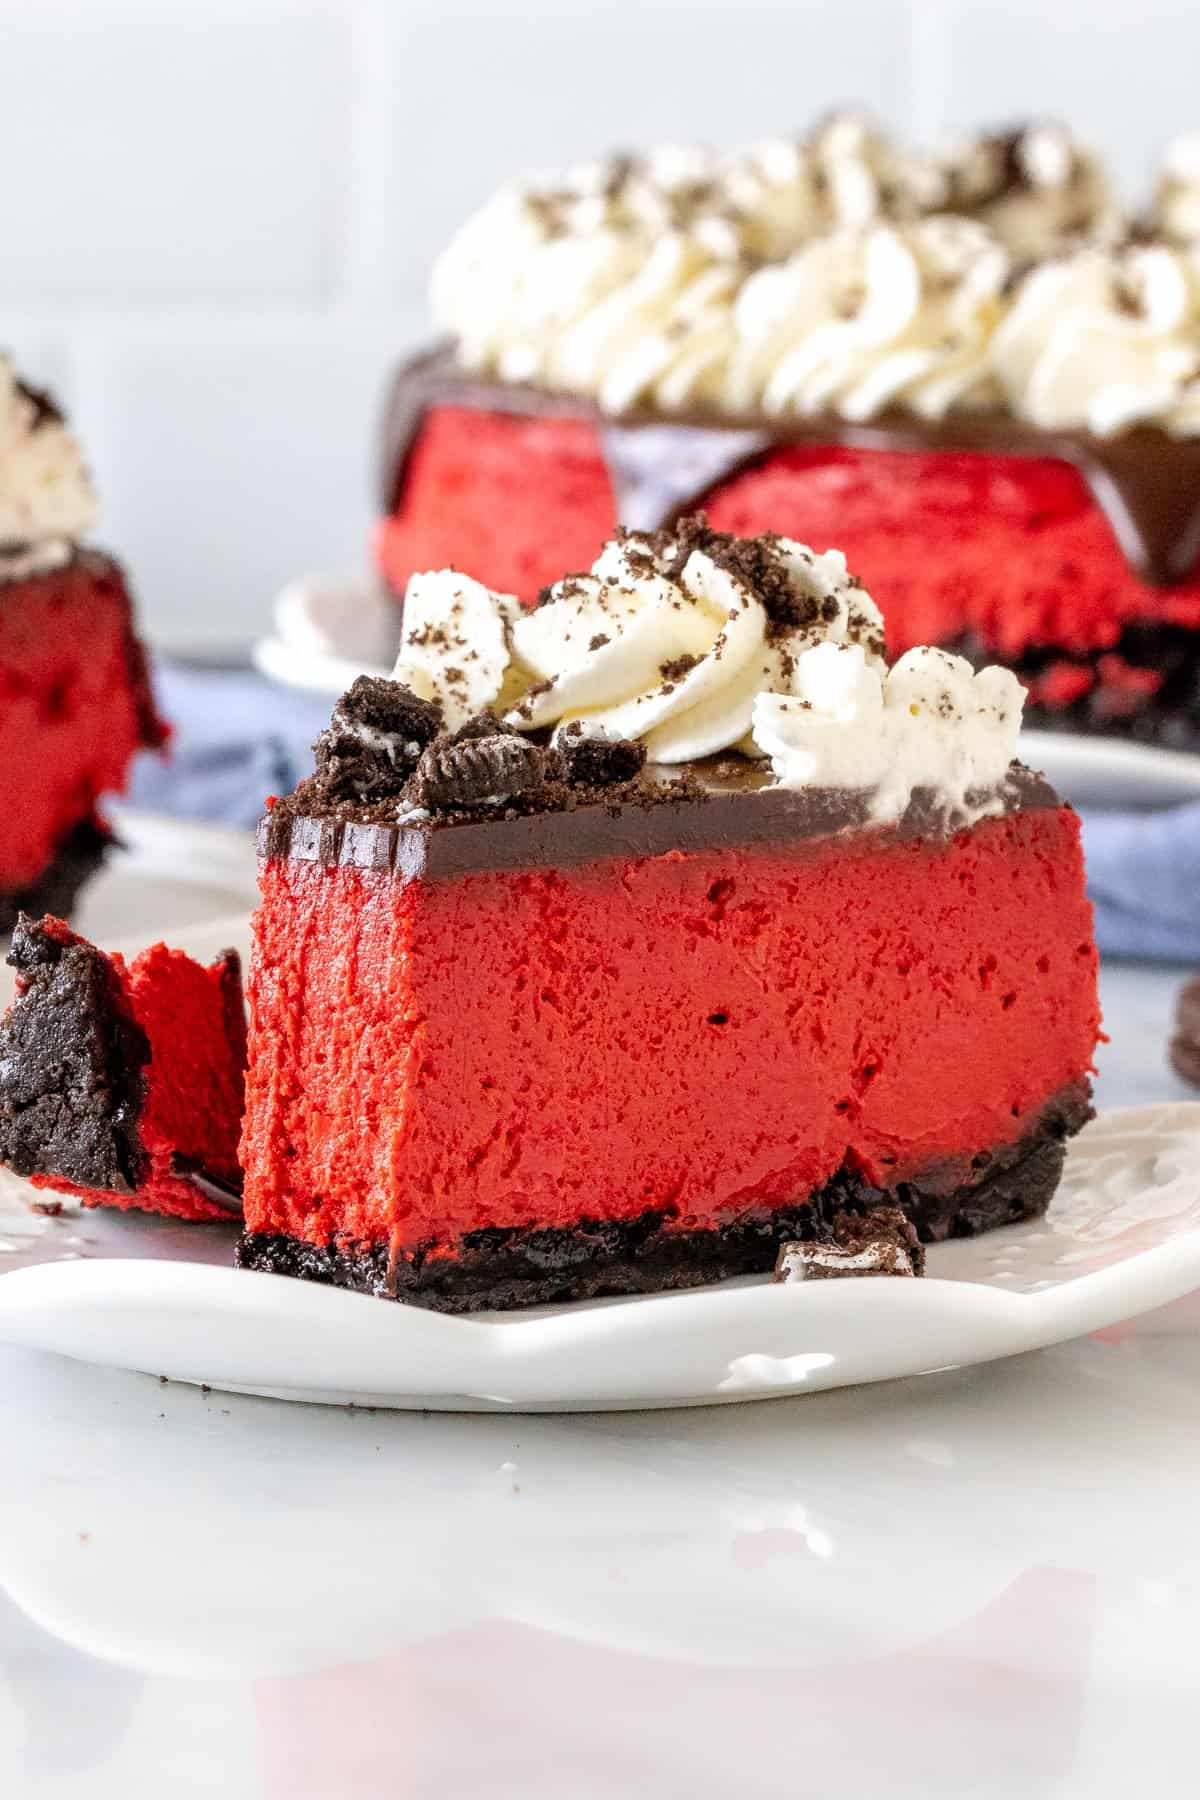 Slice of red velvet Oreo cheesecake with a bite taken out